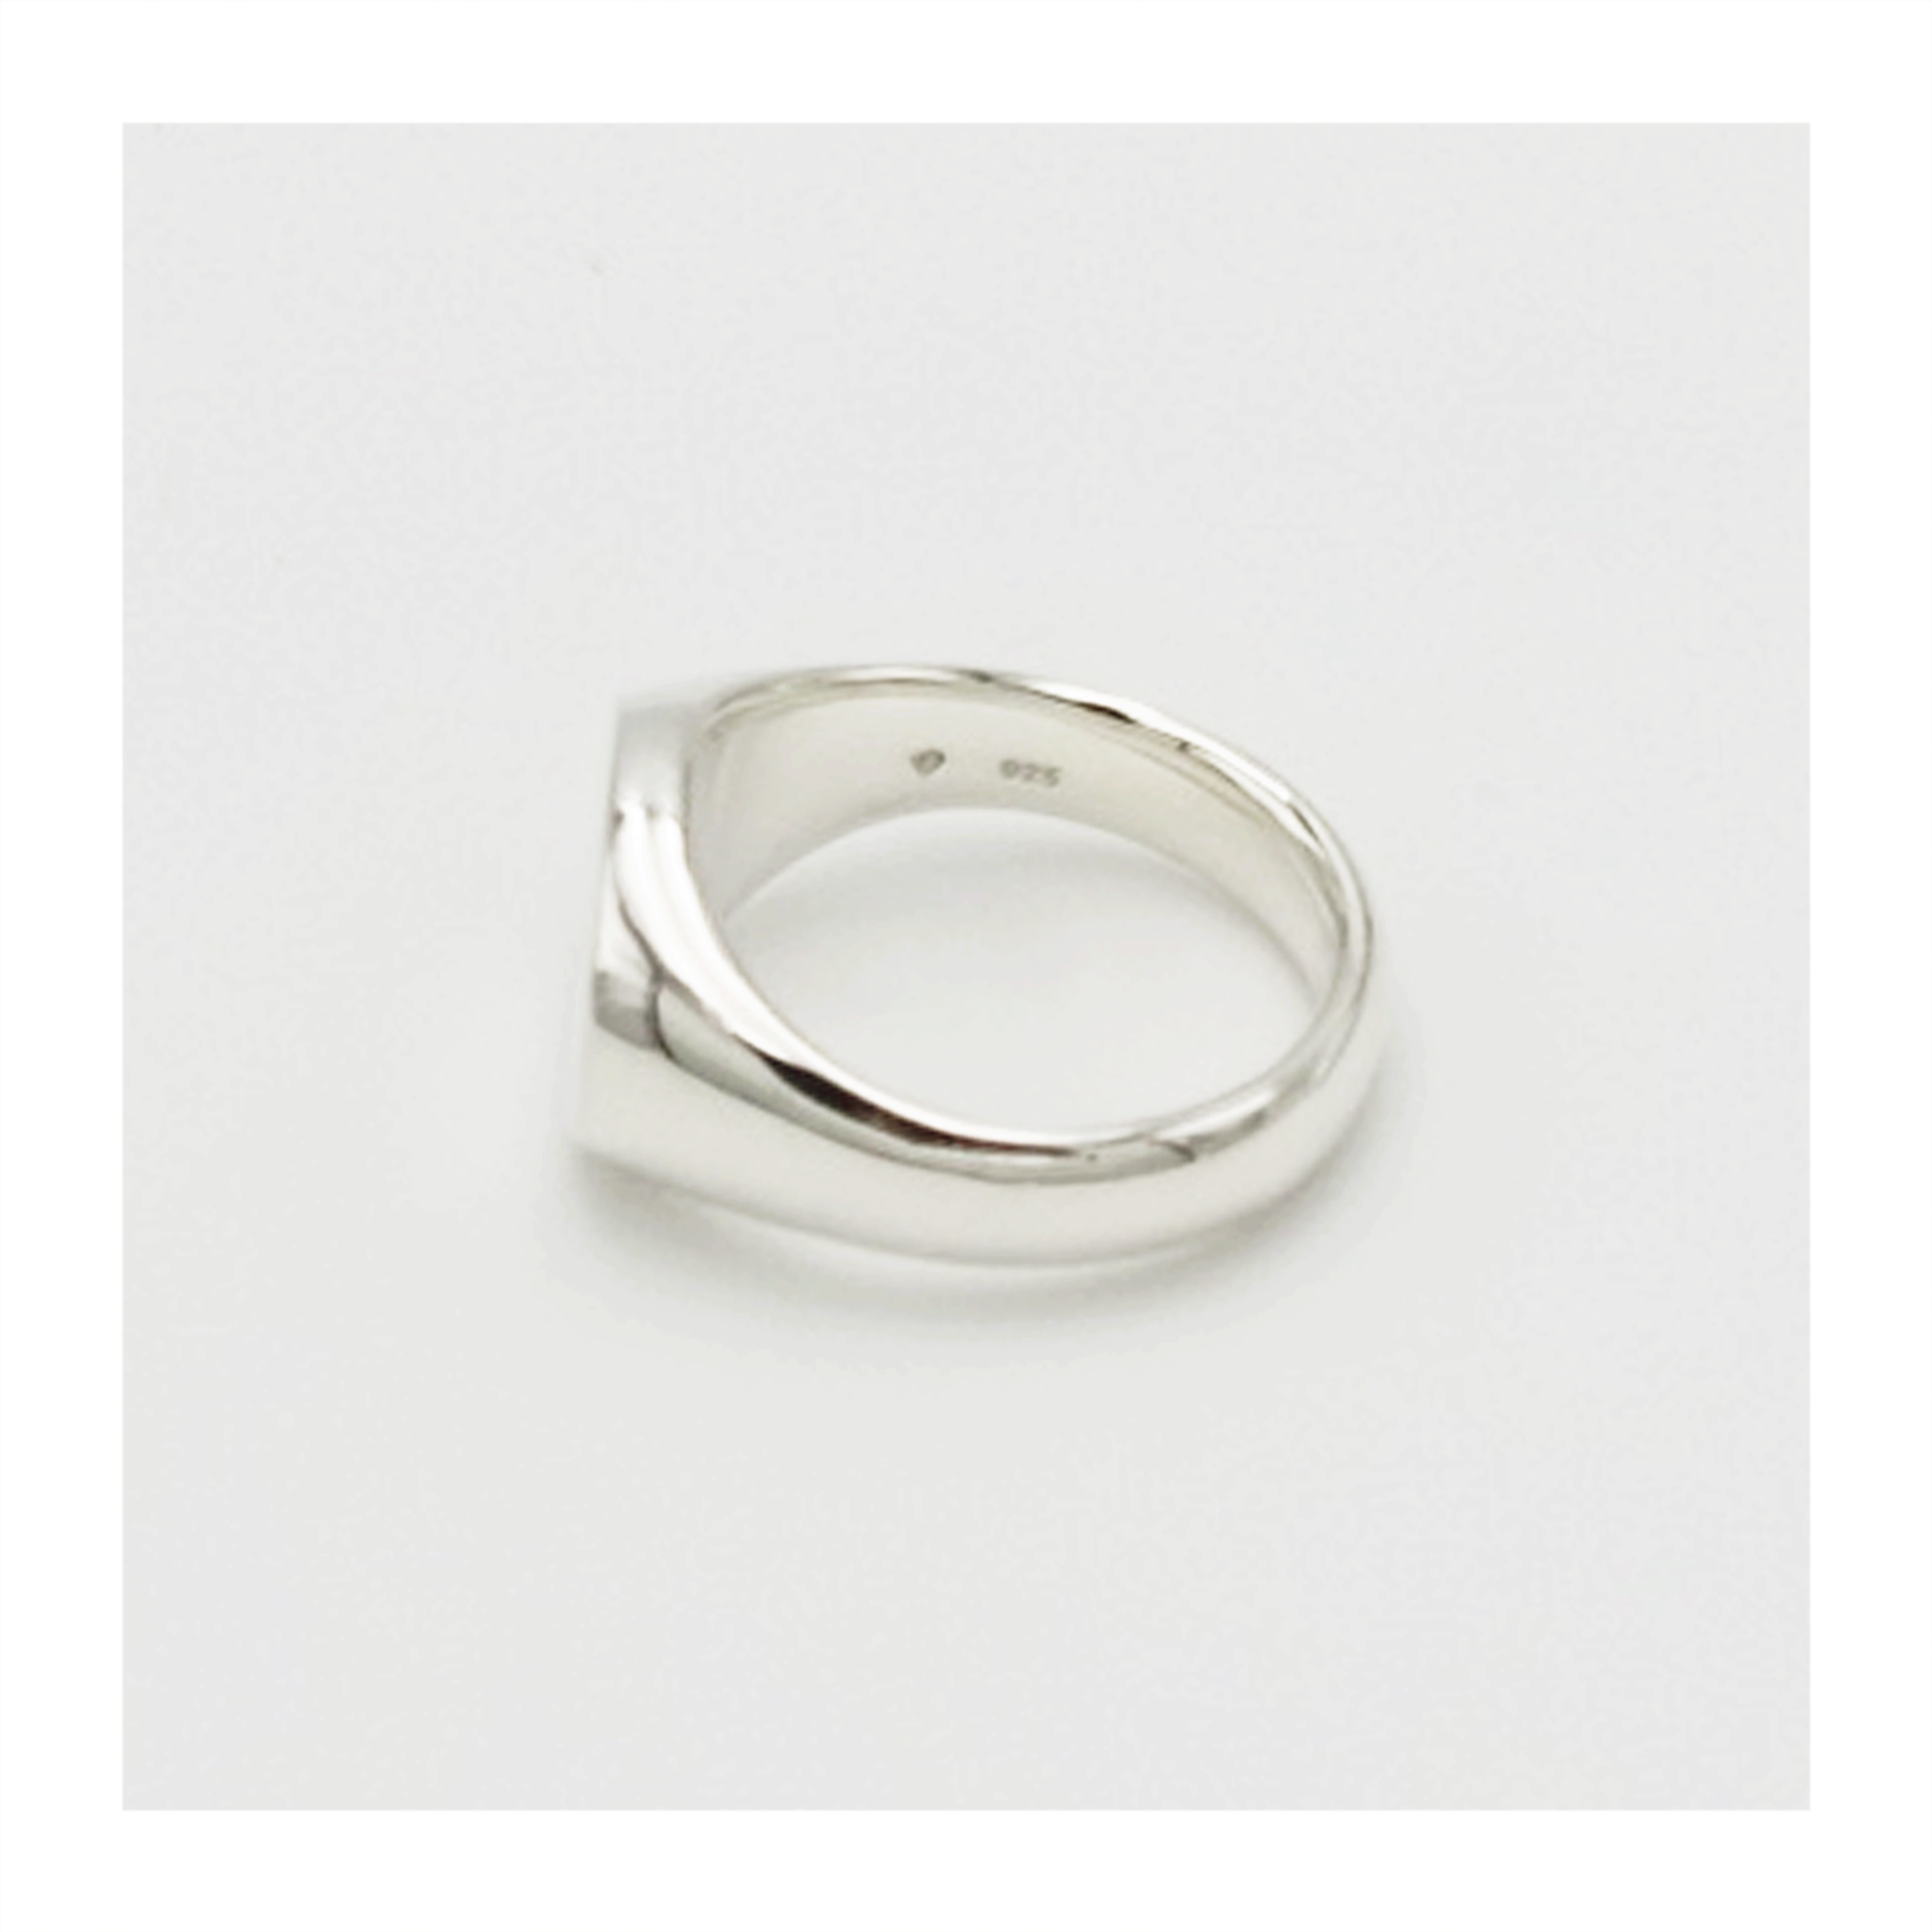 SIGNET Ring Round WIDE | INDEPENDENT Flowers u0026 Co. 21 / Silver